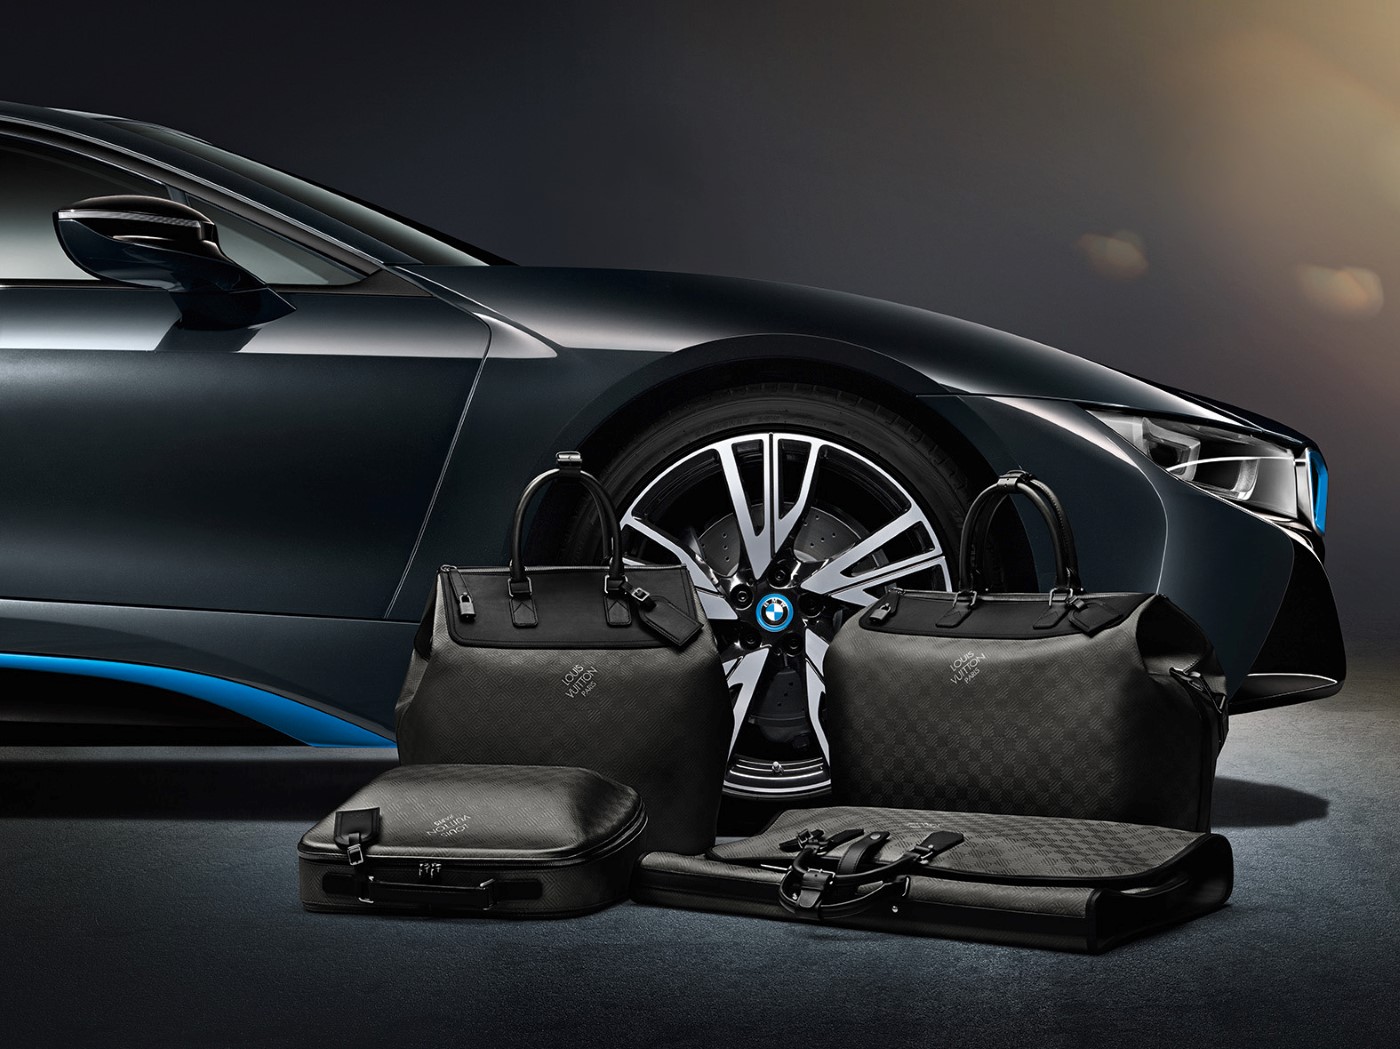 Buying A BMW i8? Get The Matching Set Of Luis Vuitton Luggage